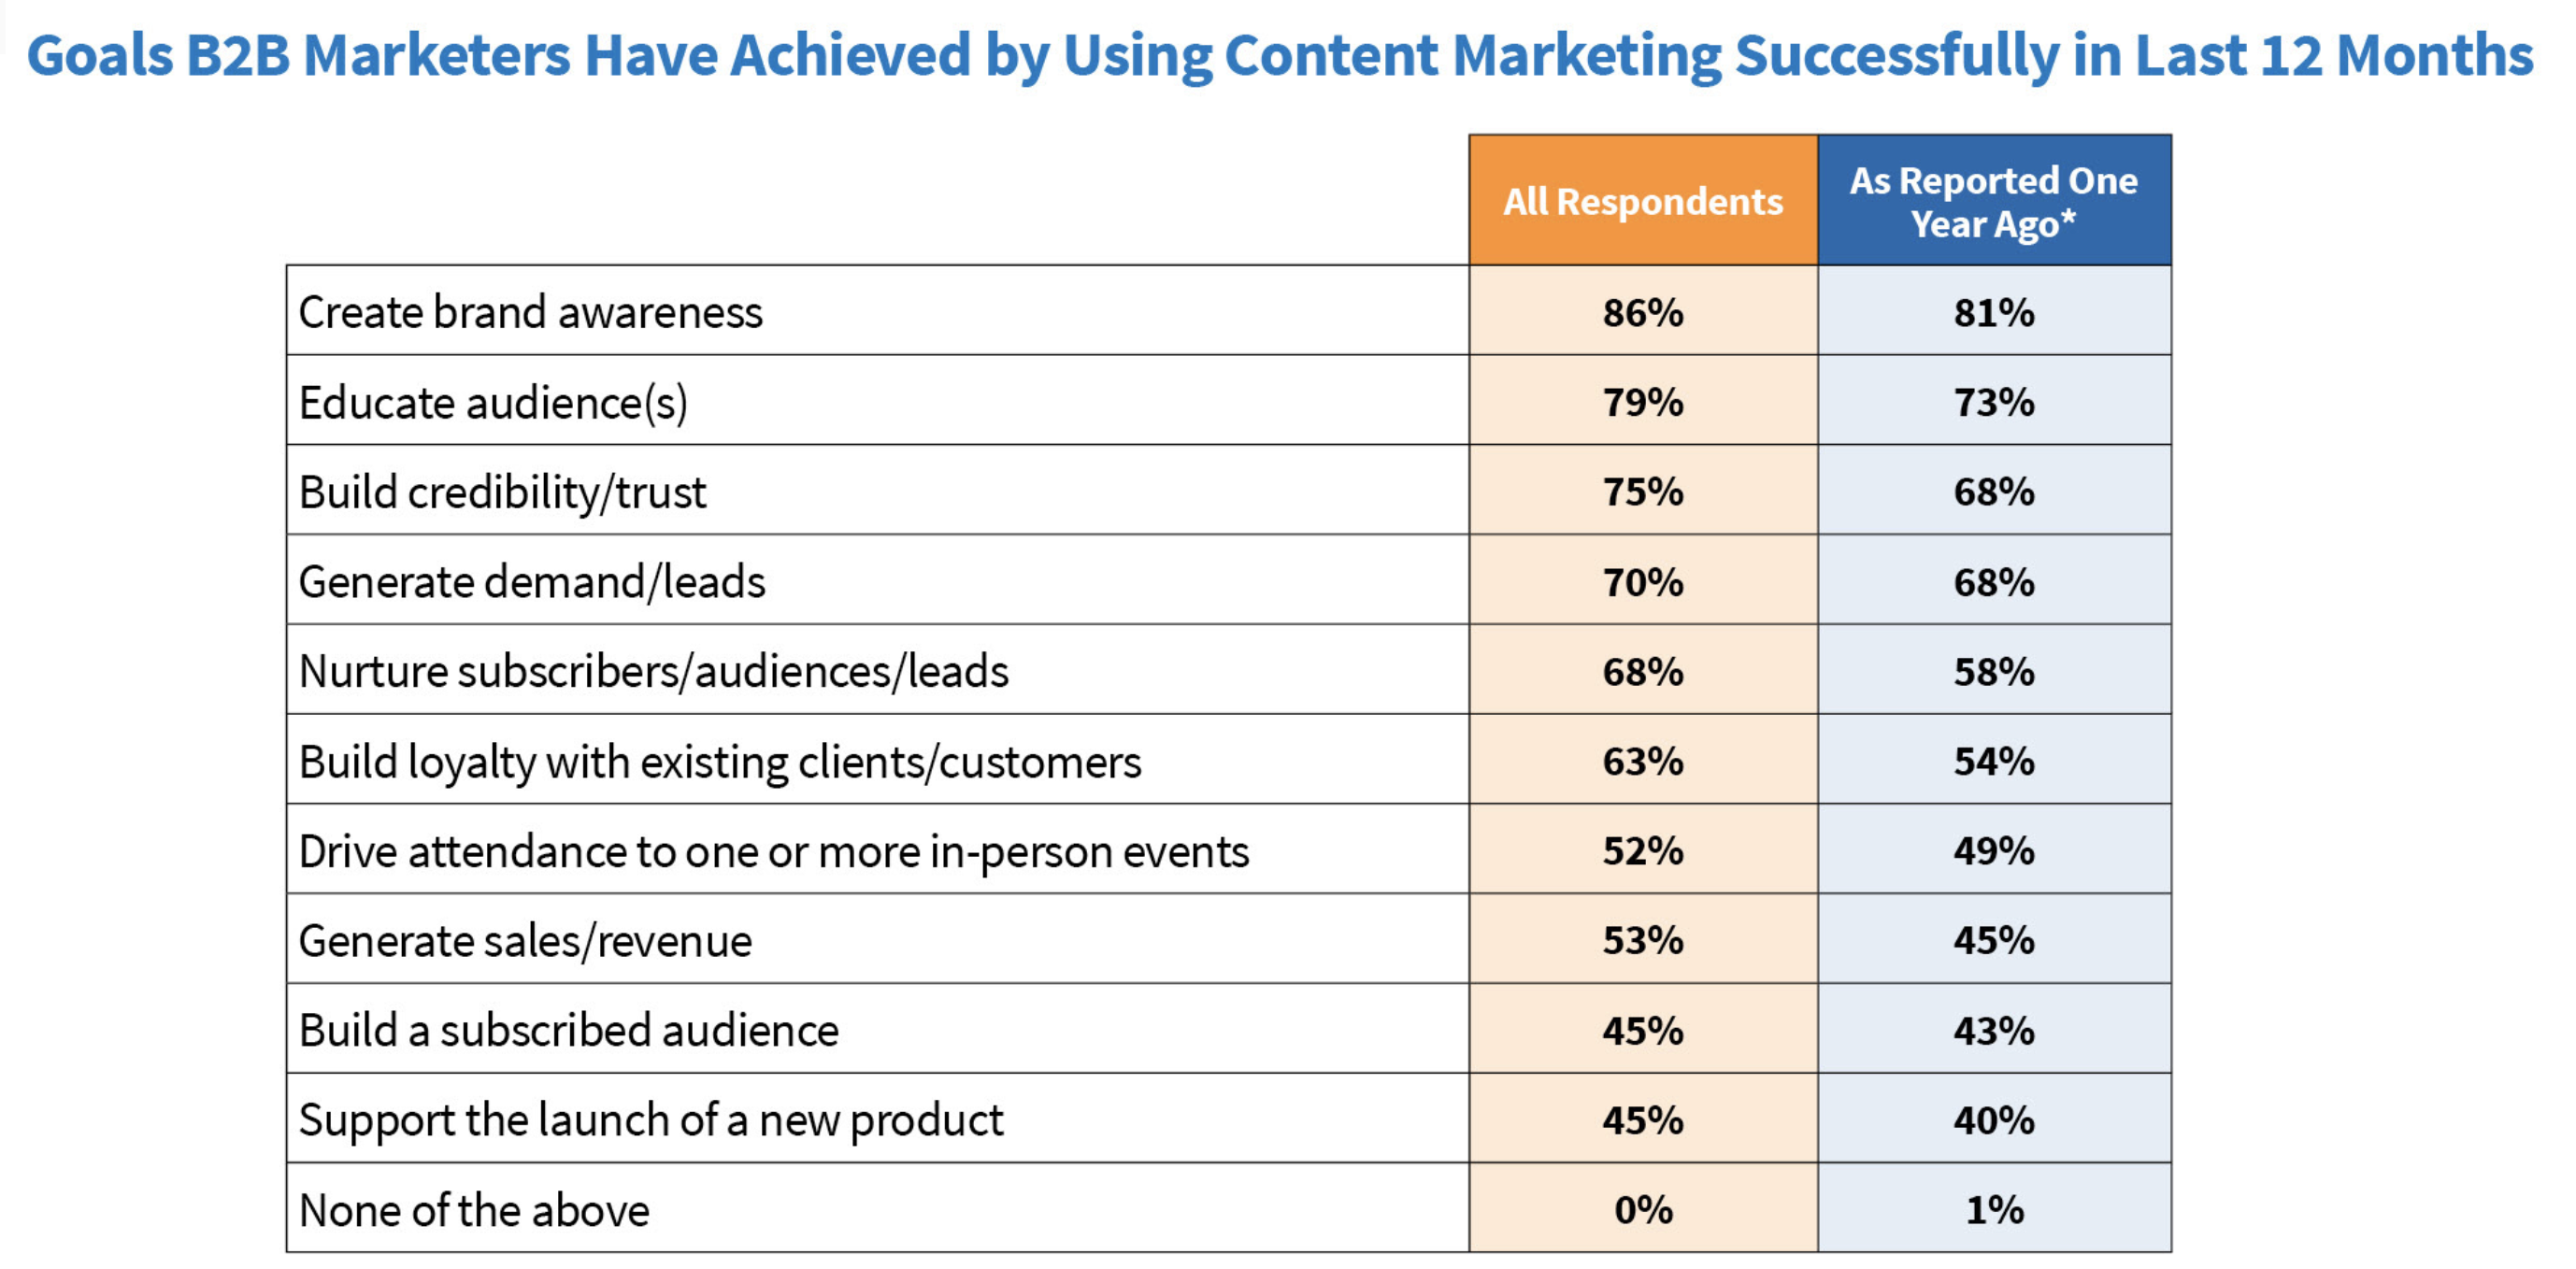 What have B2B marketers achieved with their content marketing strategy? 